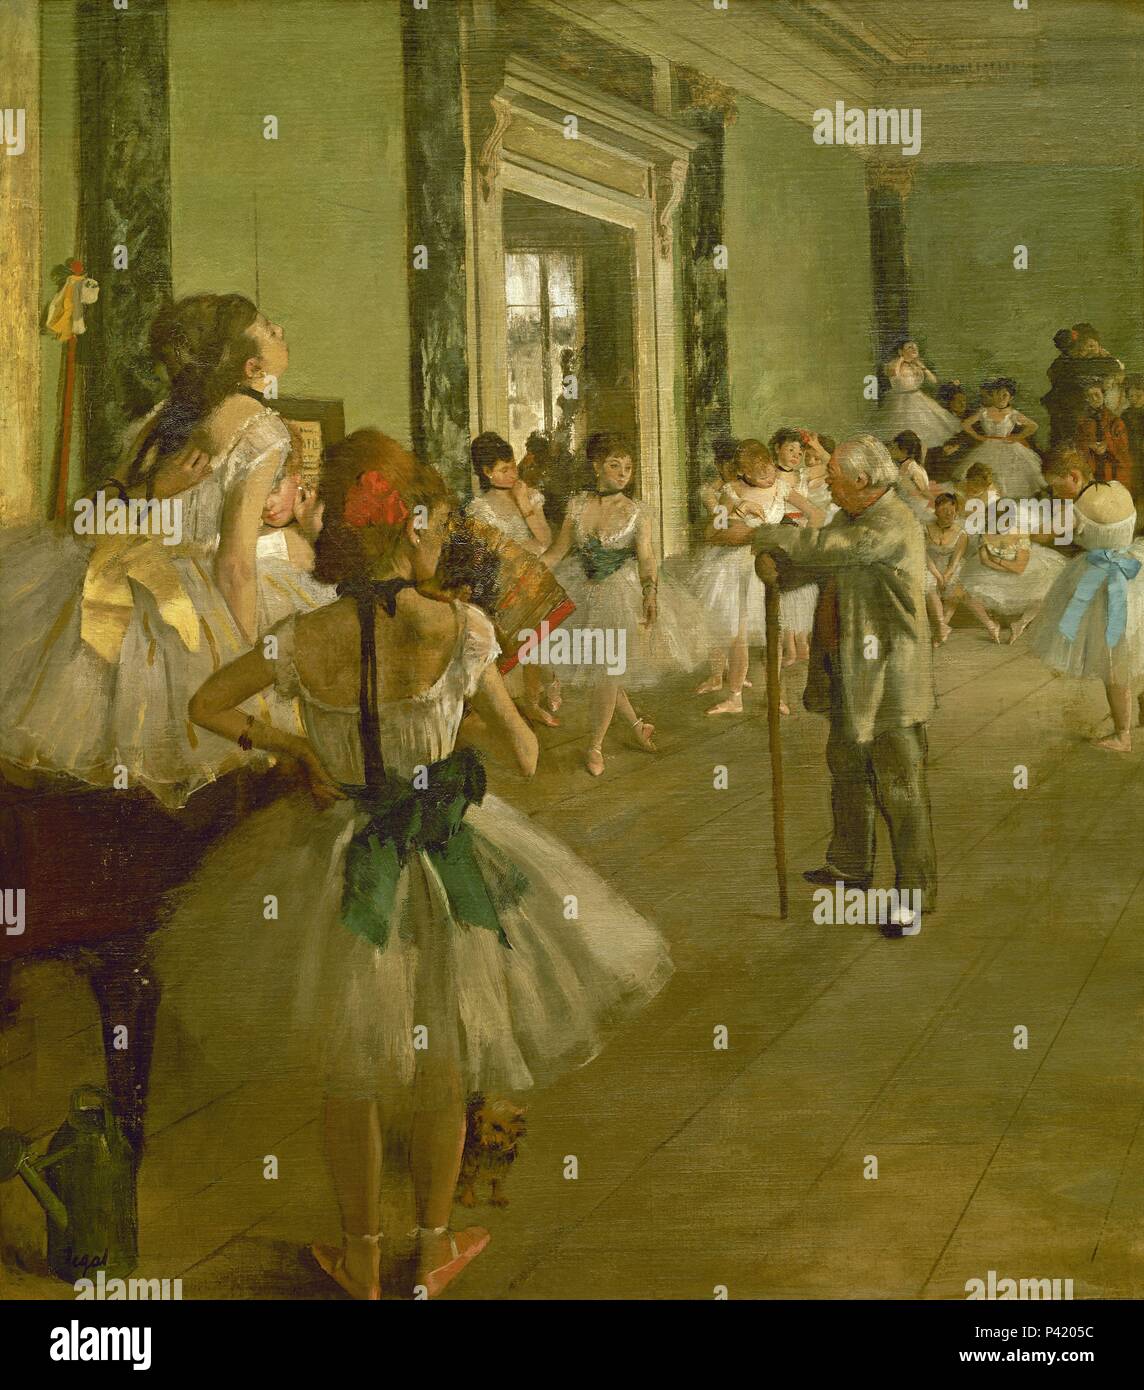 The Dancing Class - ca. 1873/76 - 85x75 cm - oil on canvas. Author: Edgar Degas (1834-1917). Location: MUSEE D'ORSAY, FRANCE. Also known as: CLASE DE BAILE. Stock Photo